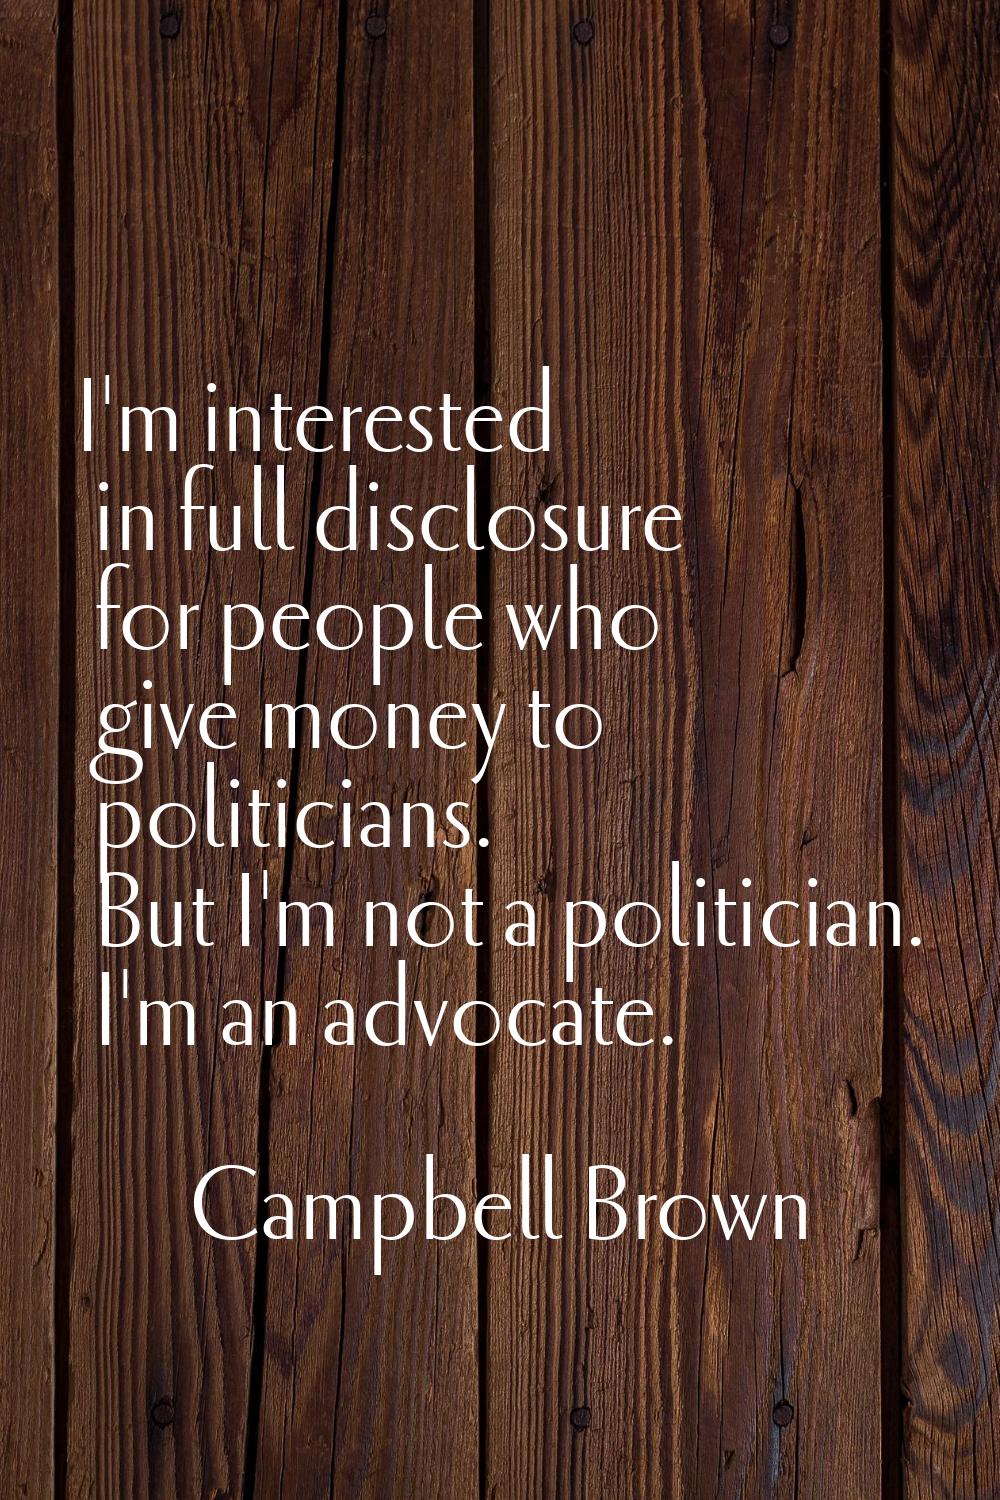 I'm interested in full disclosure for people who give money to politicians. But I'm not a politicia